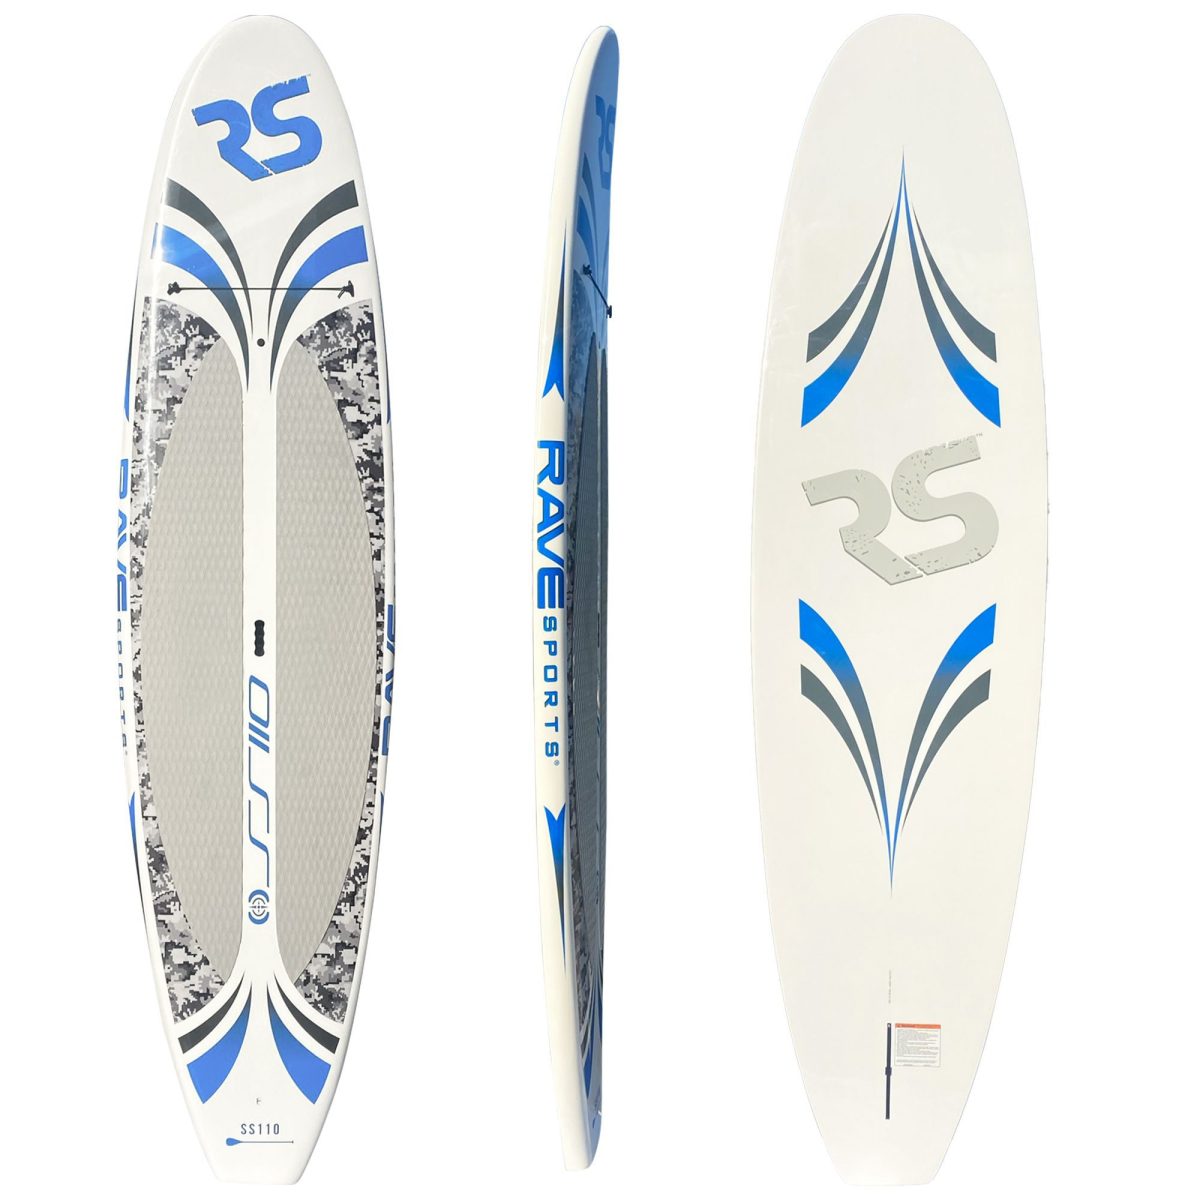 RAVE Sports Shoreline Digital Series SS110 SUP Stand-Up Paddleboard - Camo Blue